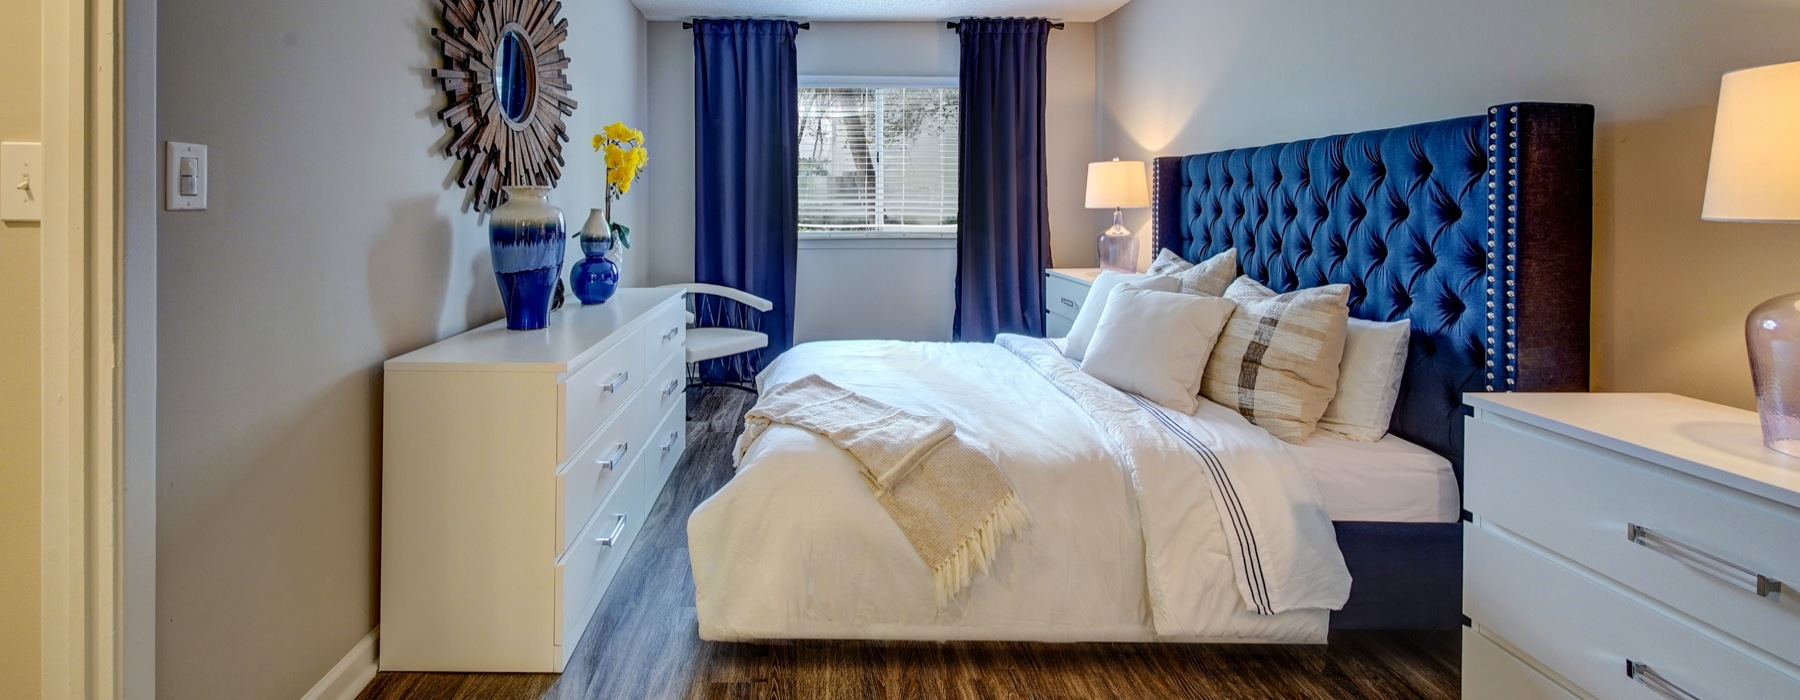 Typical Apartment Bedroom which fits a king size bed with end tables and a large dresser